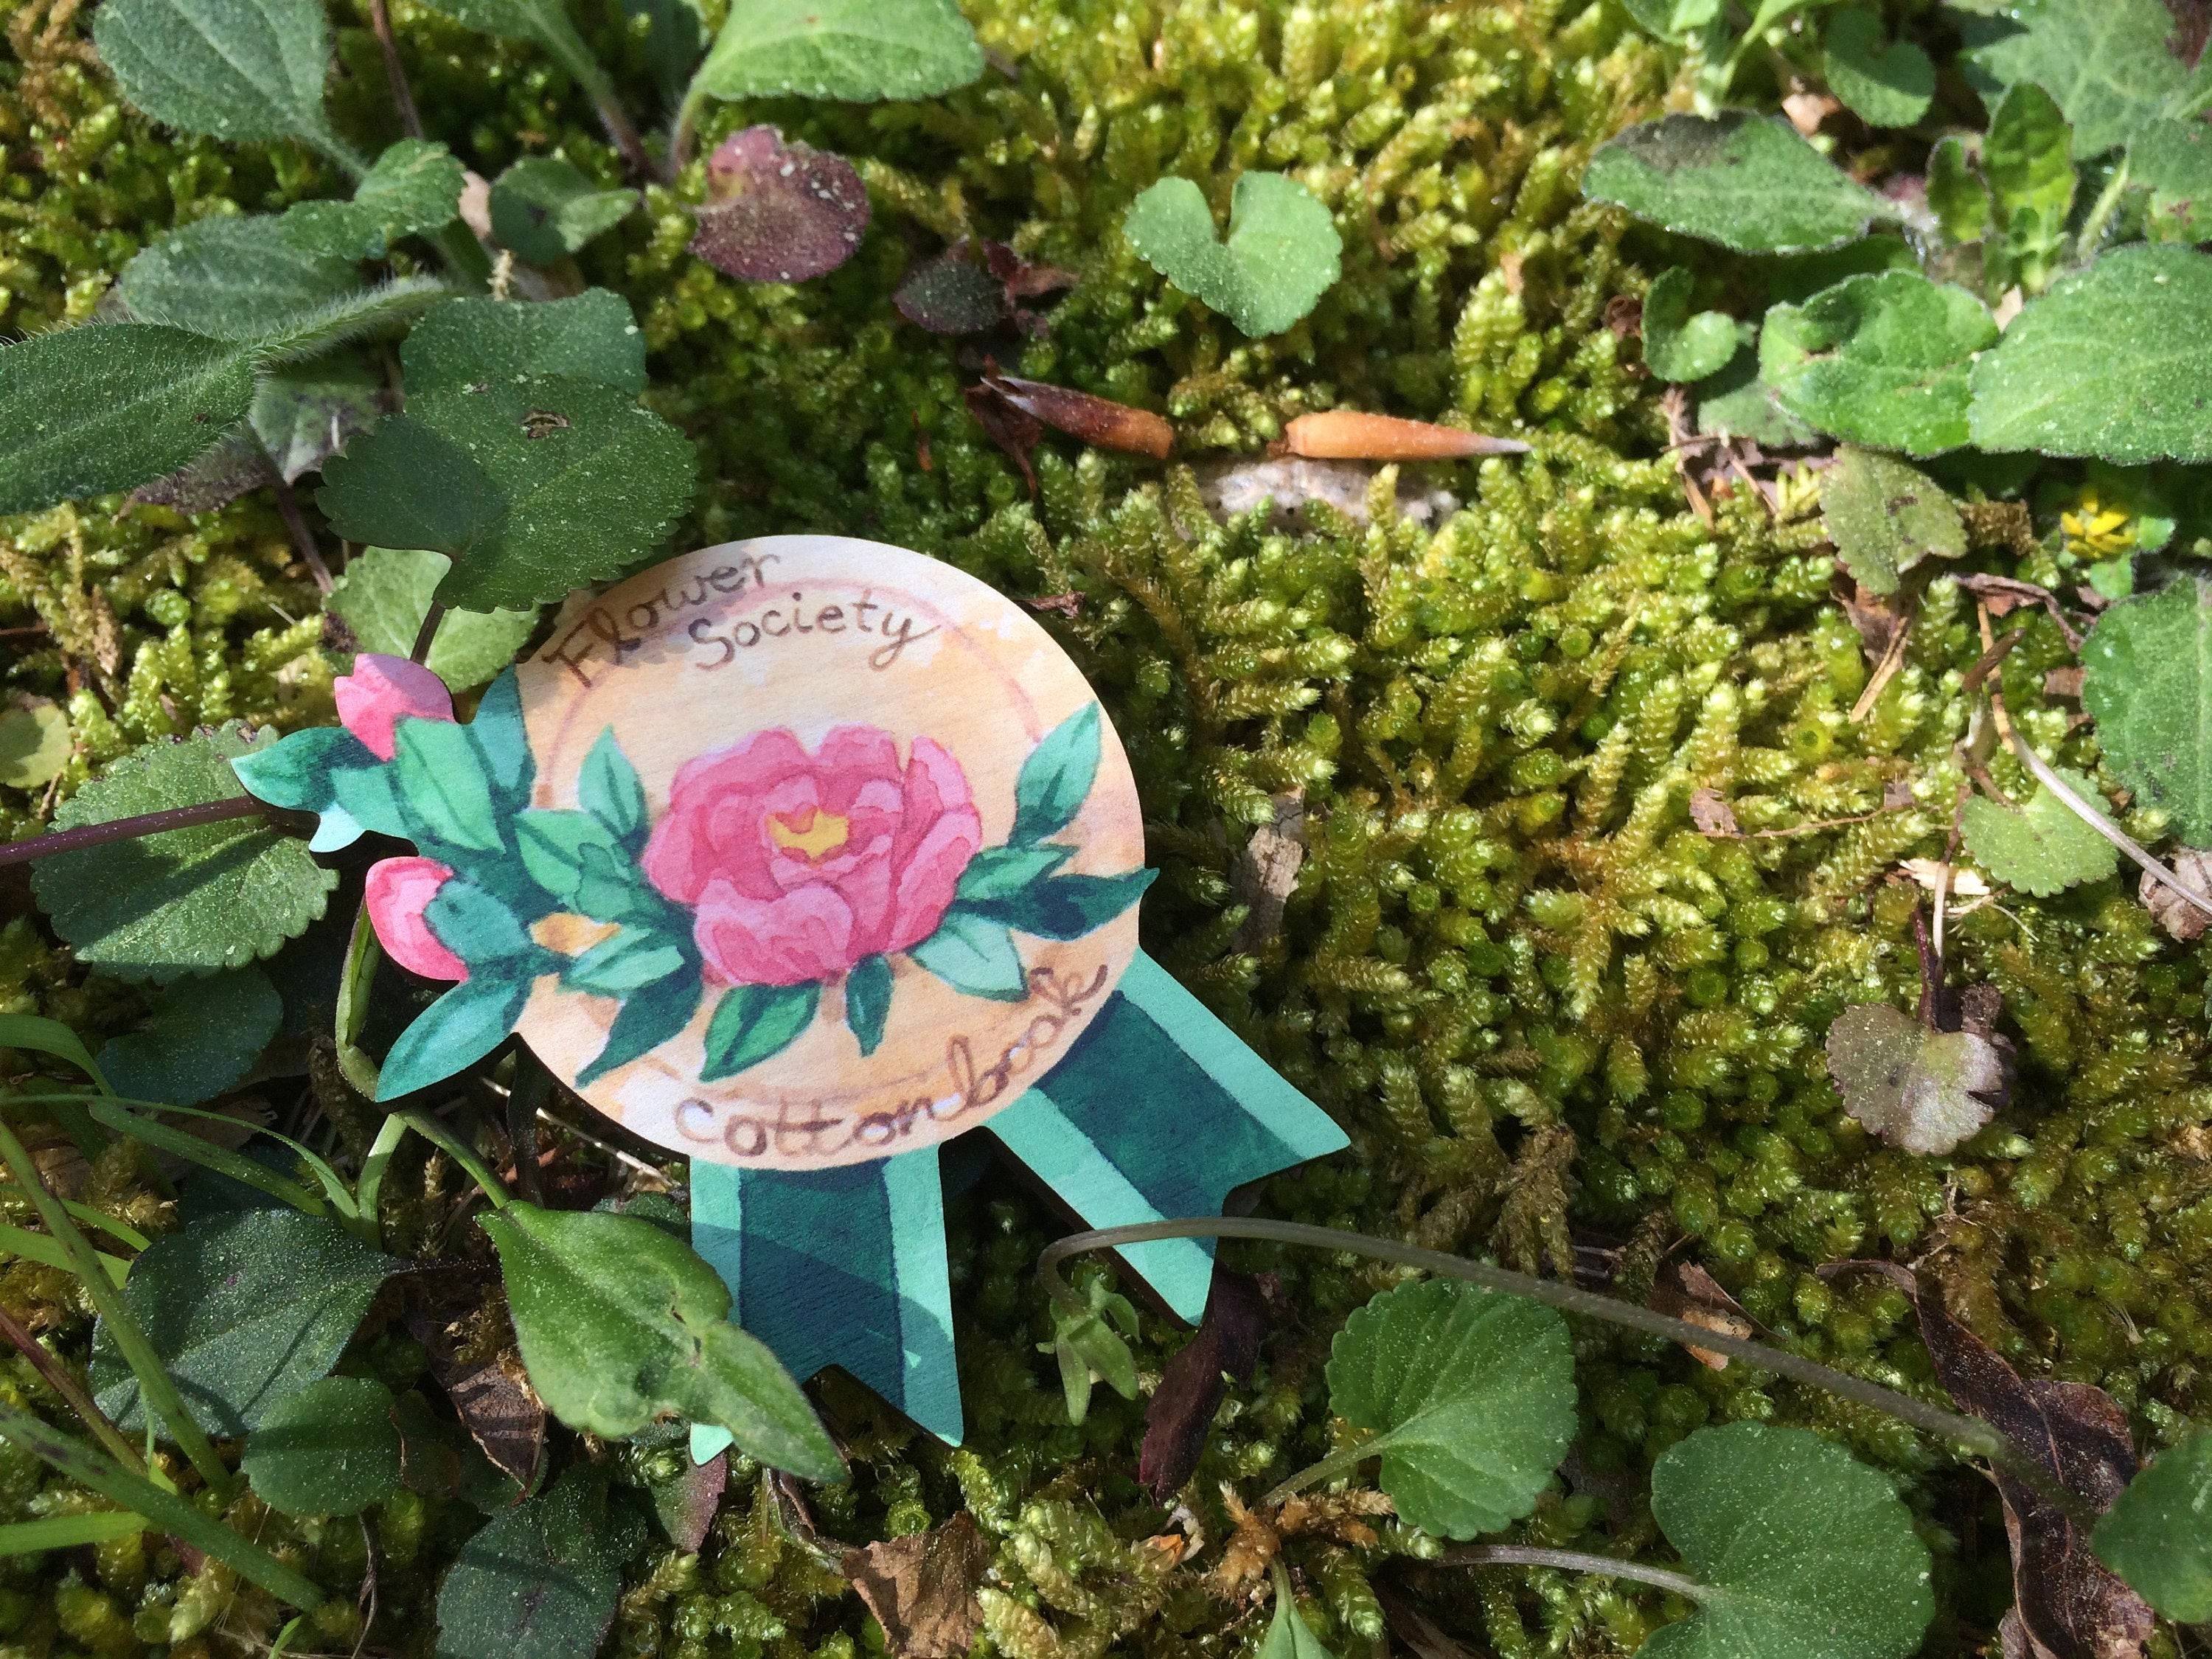 Flower Society Badge - Imaginary Societies Wooden Pin - Lolita Collective